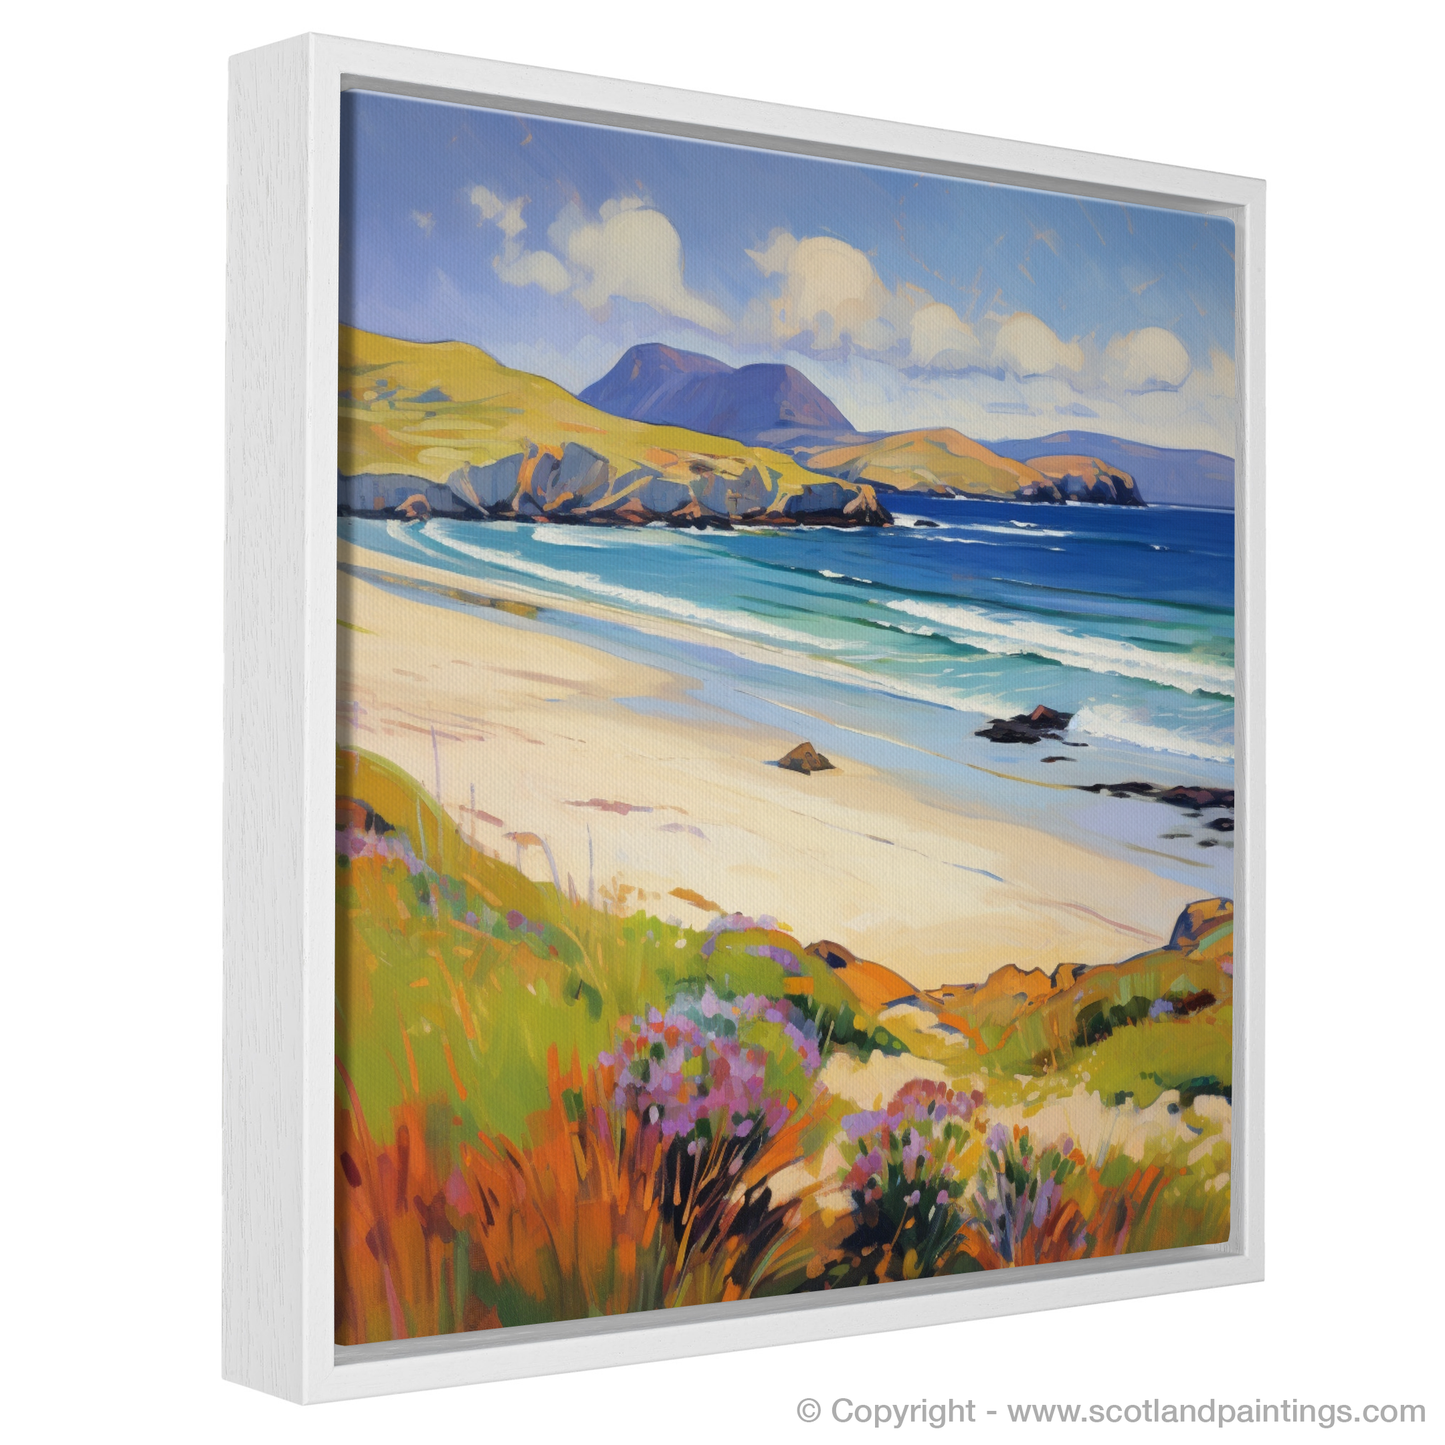 Painting and Art Print of Sandwood Bay, Sutherland in summer entitled "Wild Colours of Sandwood Bay: A Fauvist Summer Symphony".